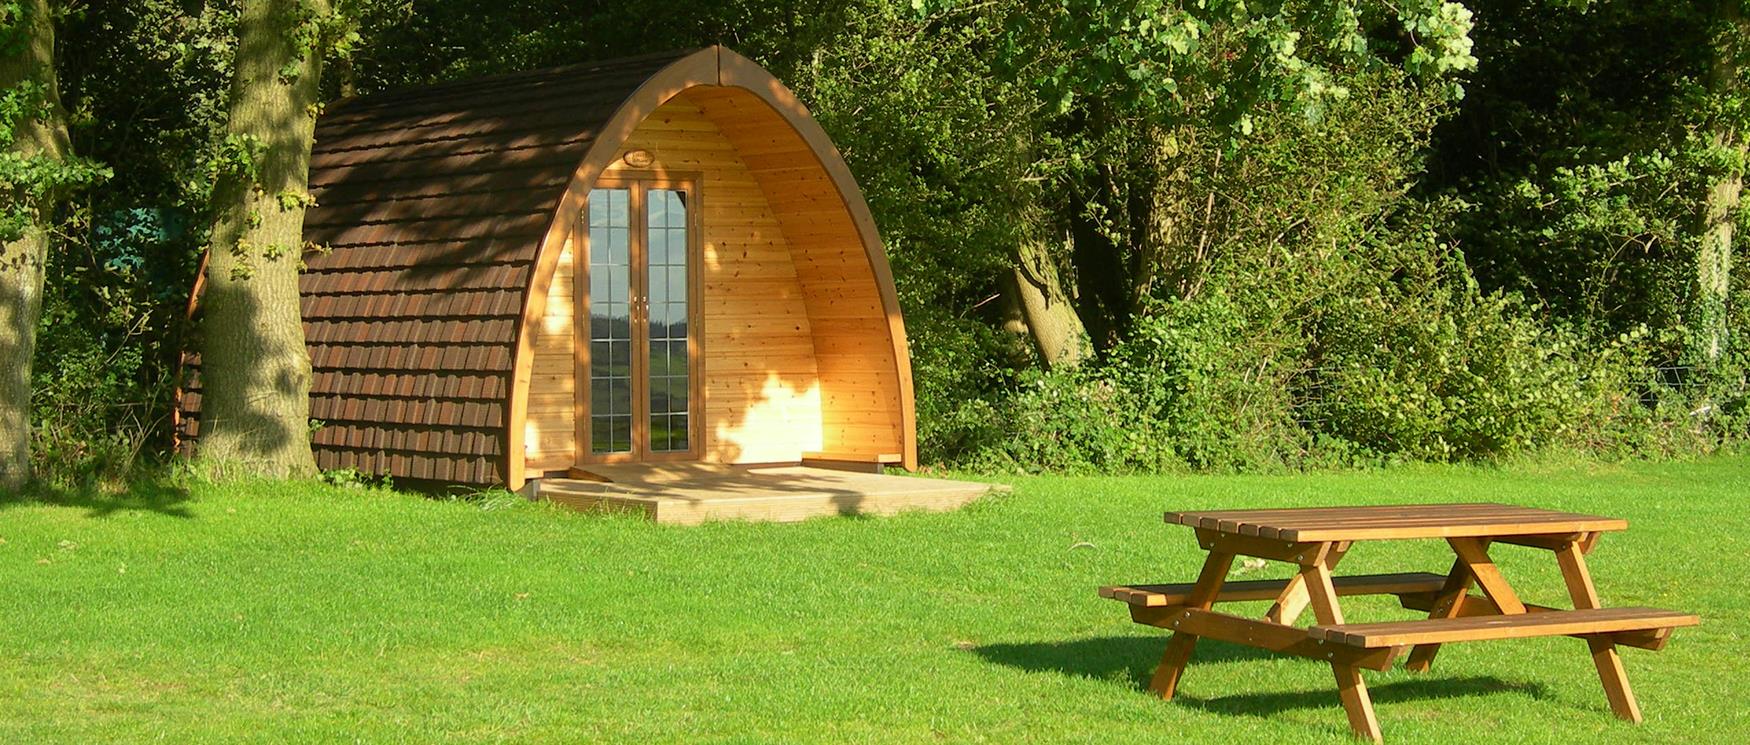 Two Hoots Glamping Pods in Hampshire